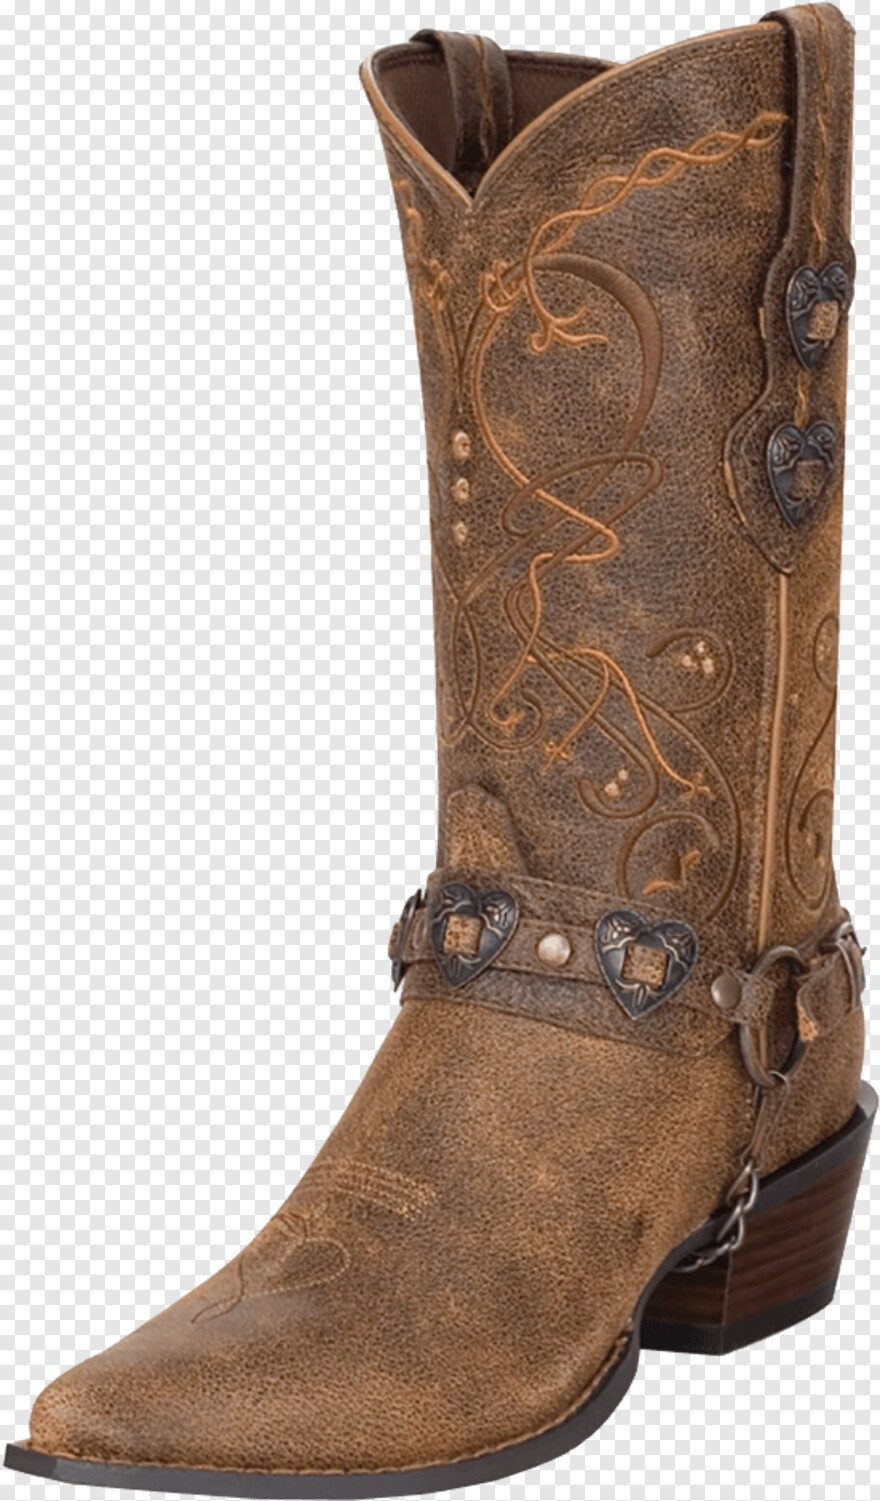 boots # 330650